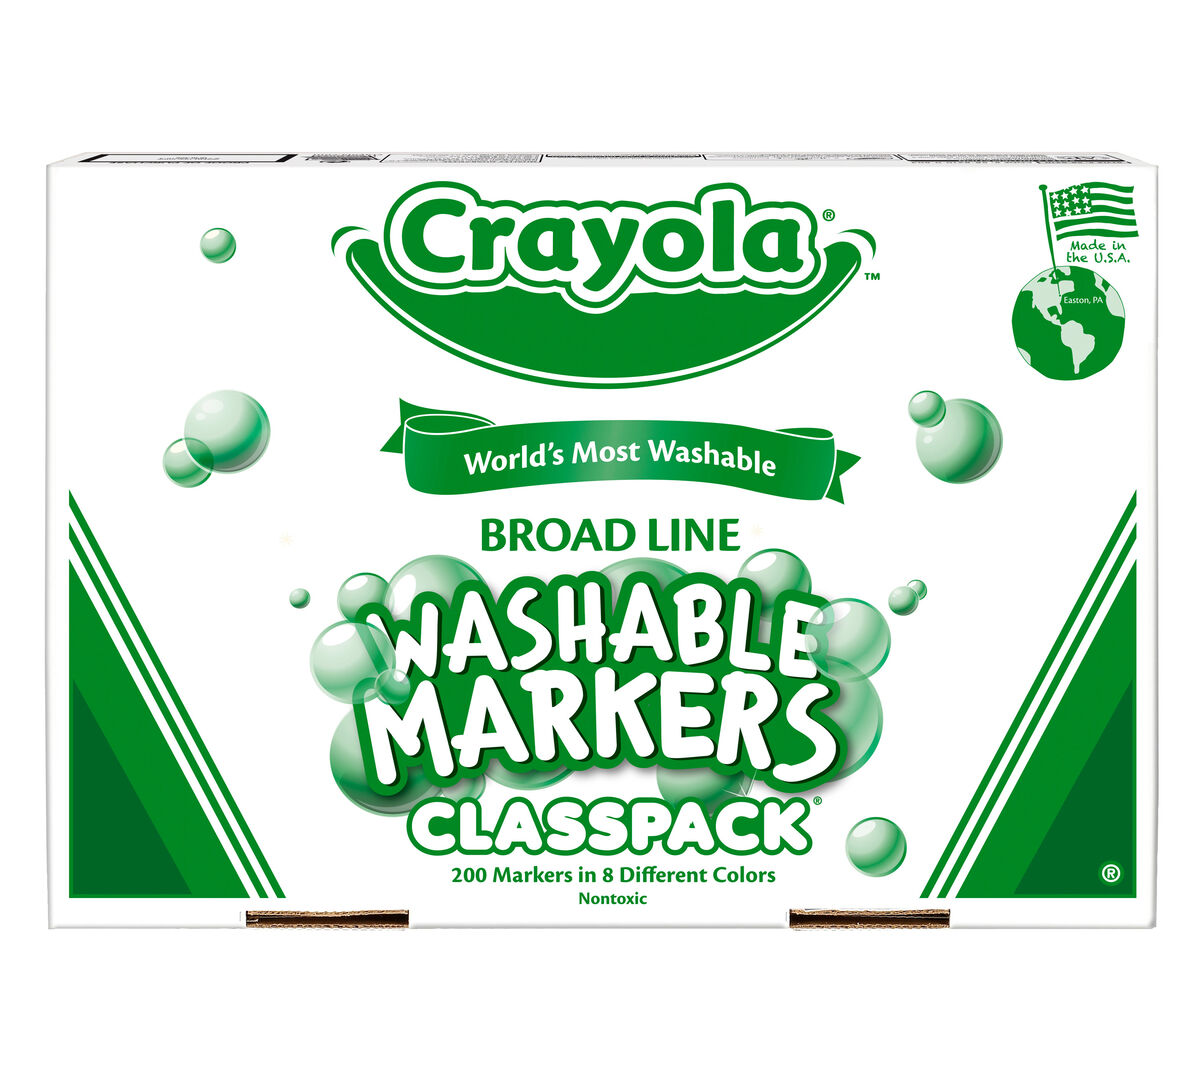 Crayola Classic Broad Line Markers are the classic, long-lasting, durable markers you know from your childhood. They lay down lots of brilliant color, yet don't bleed through most paper.  This bulk Broad Line Marker Classpack includes enough supplies for the entire class!  A total of 200 markers are included. There are 25 markers in each of the following 8 colors: Yellow, Brown, Orange, Red, Violet, Blue, Green and Black.